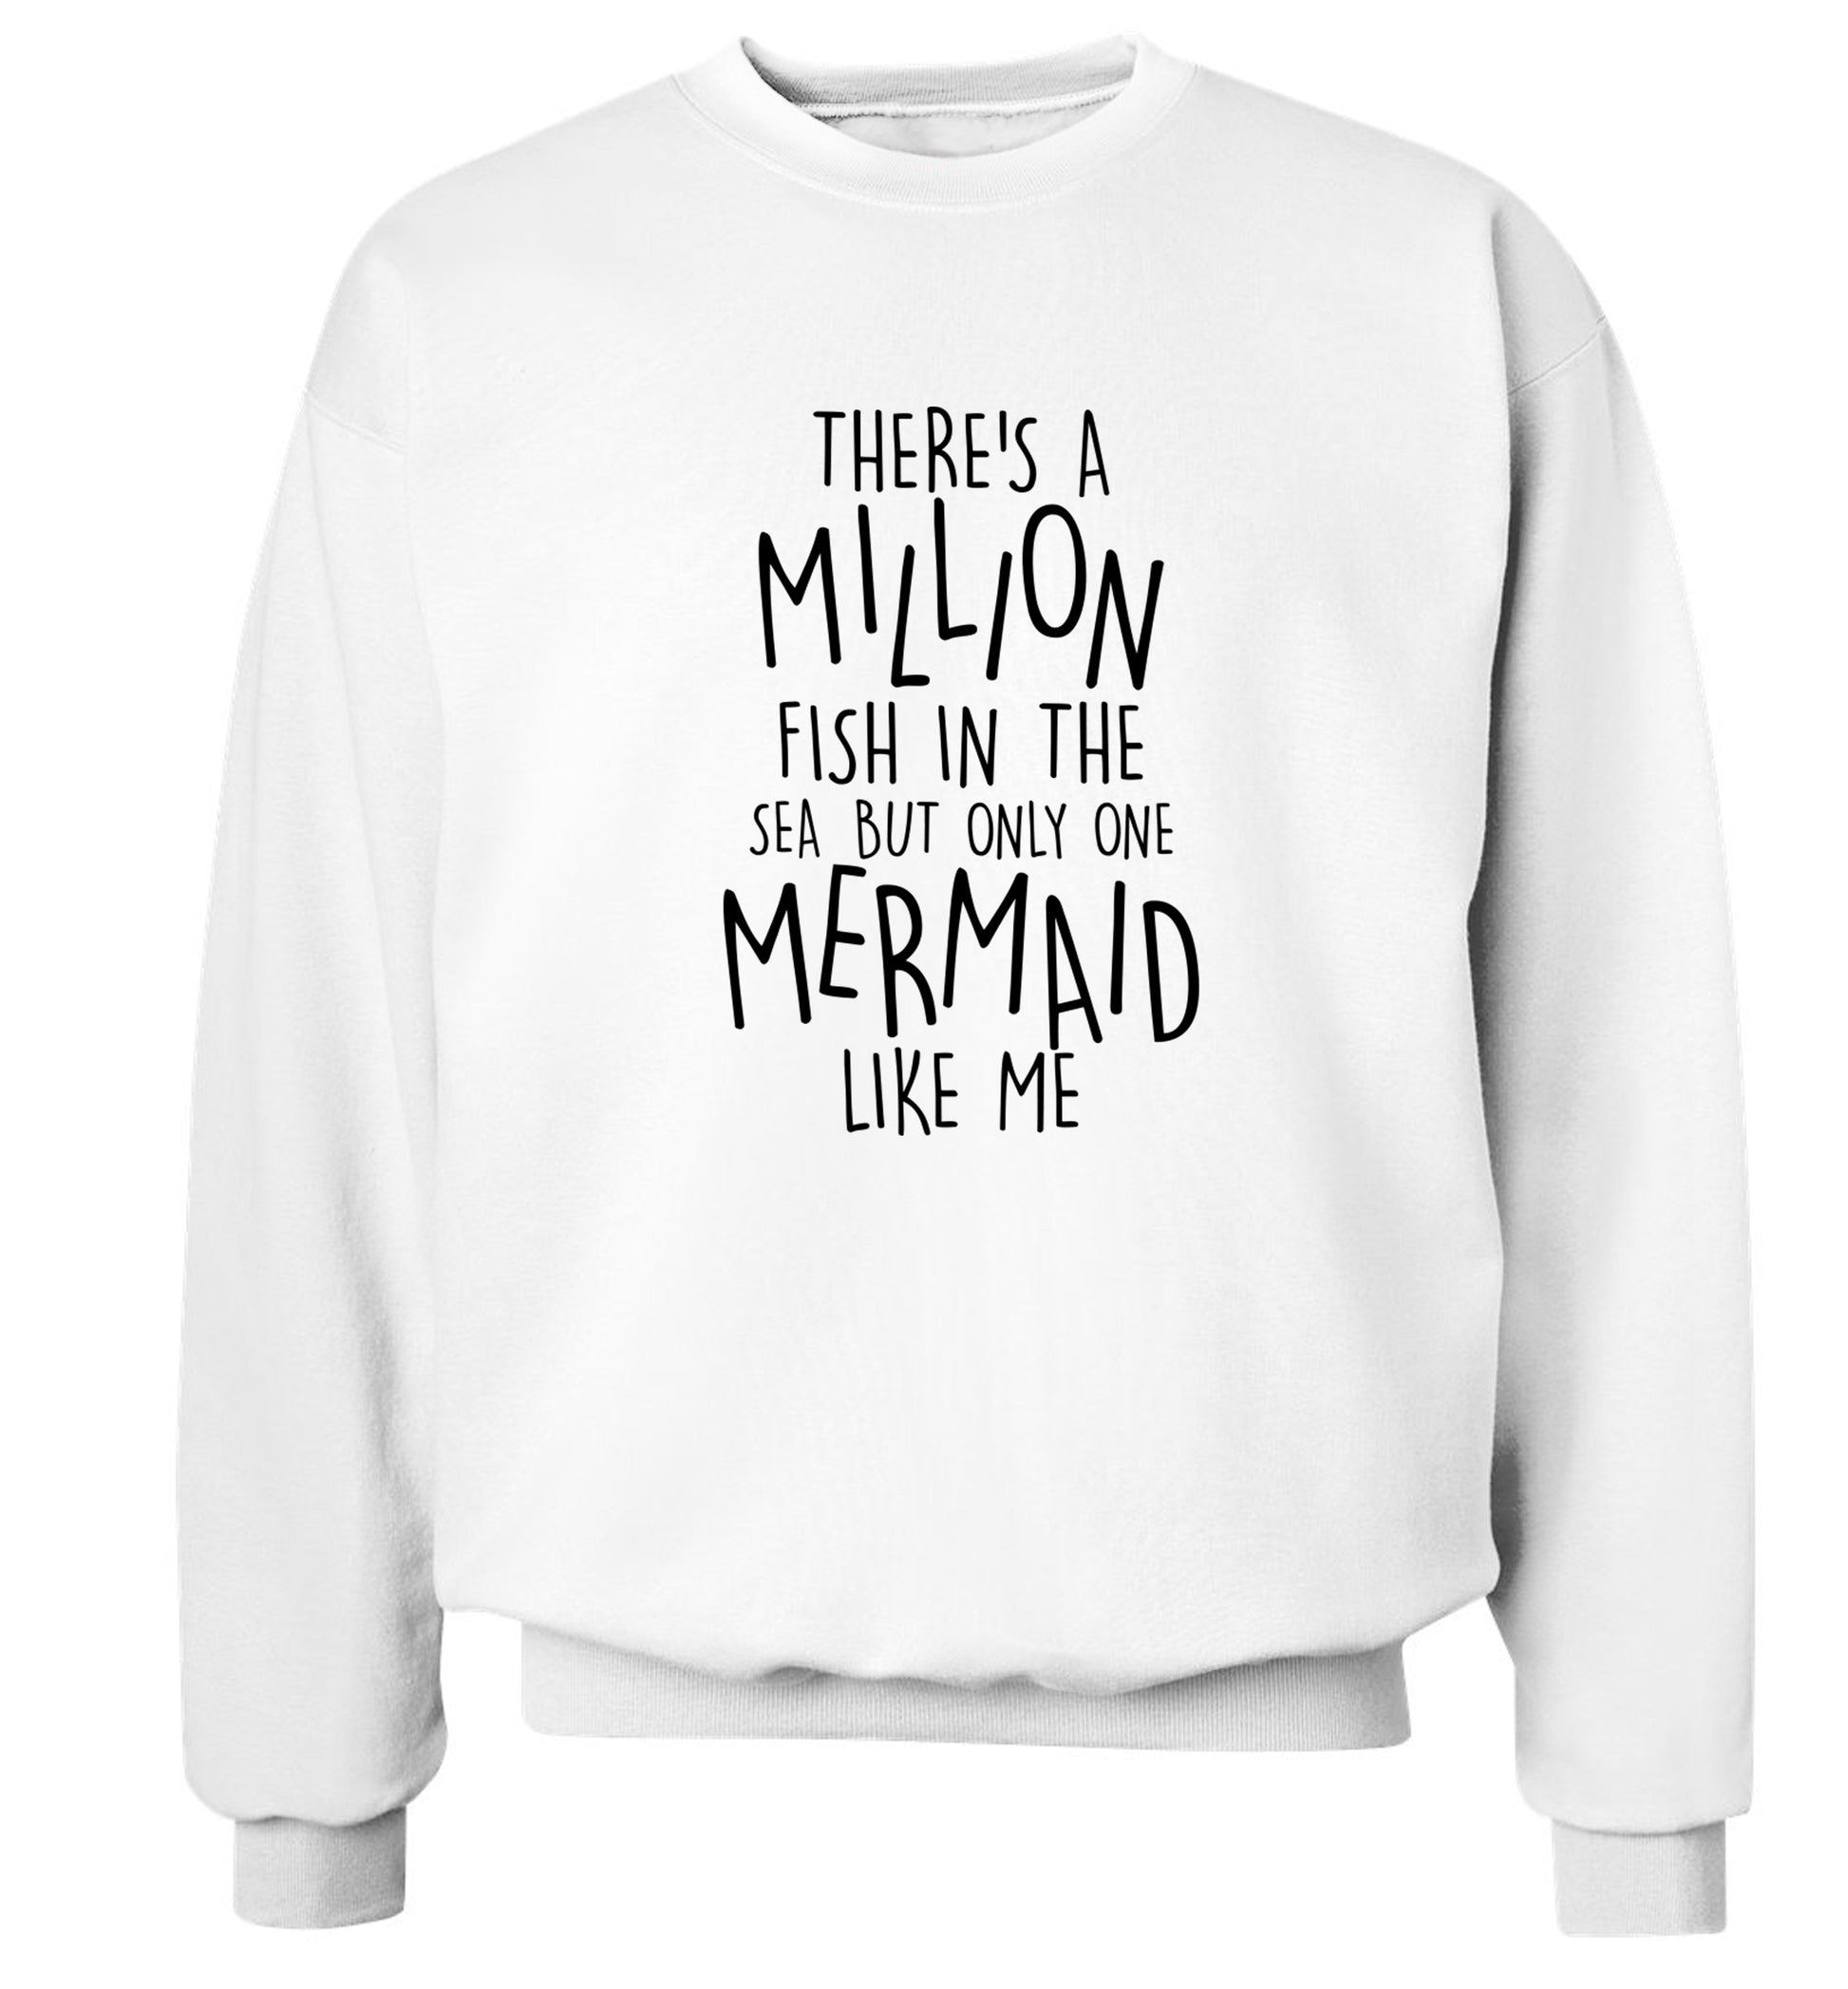 There's a million fish in the sea but only one mermaid like me Adult's unisex white Sweater 2XL